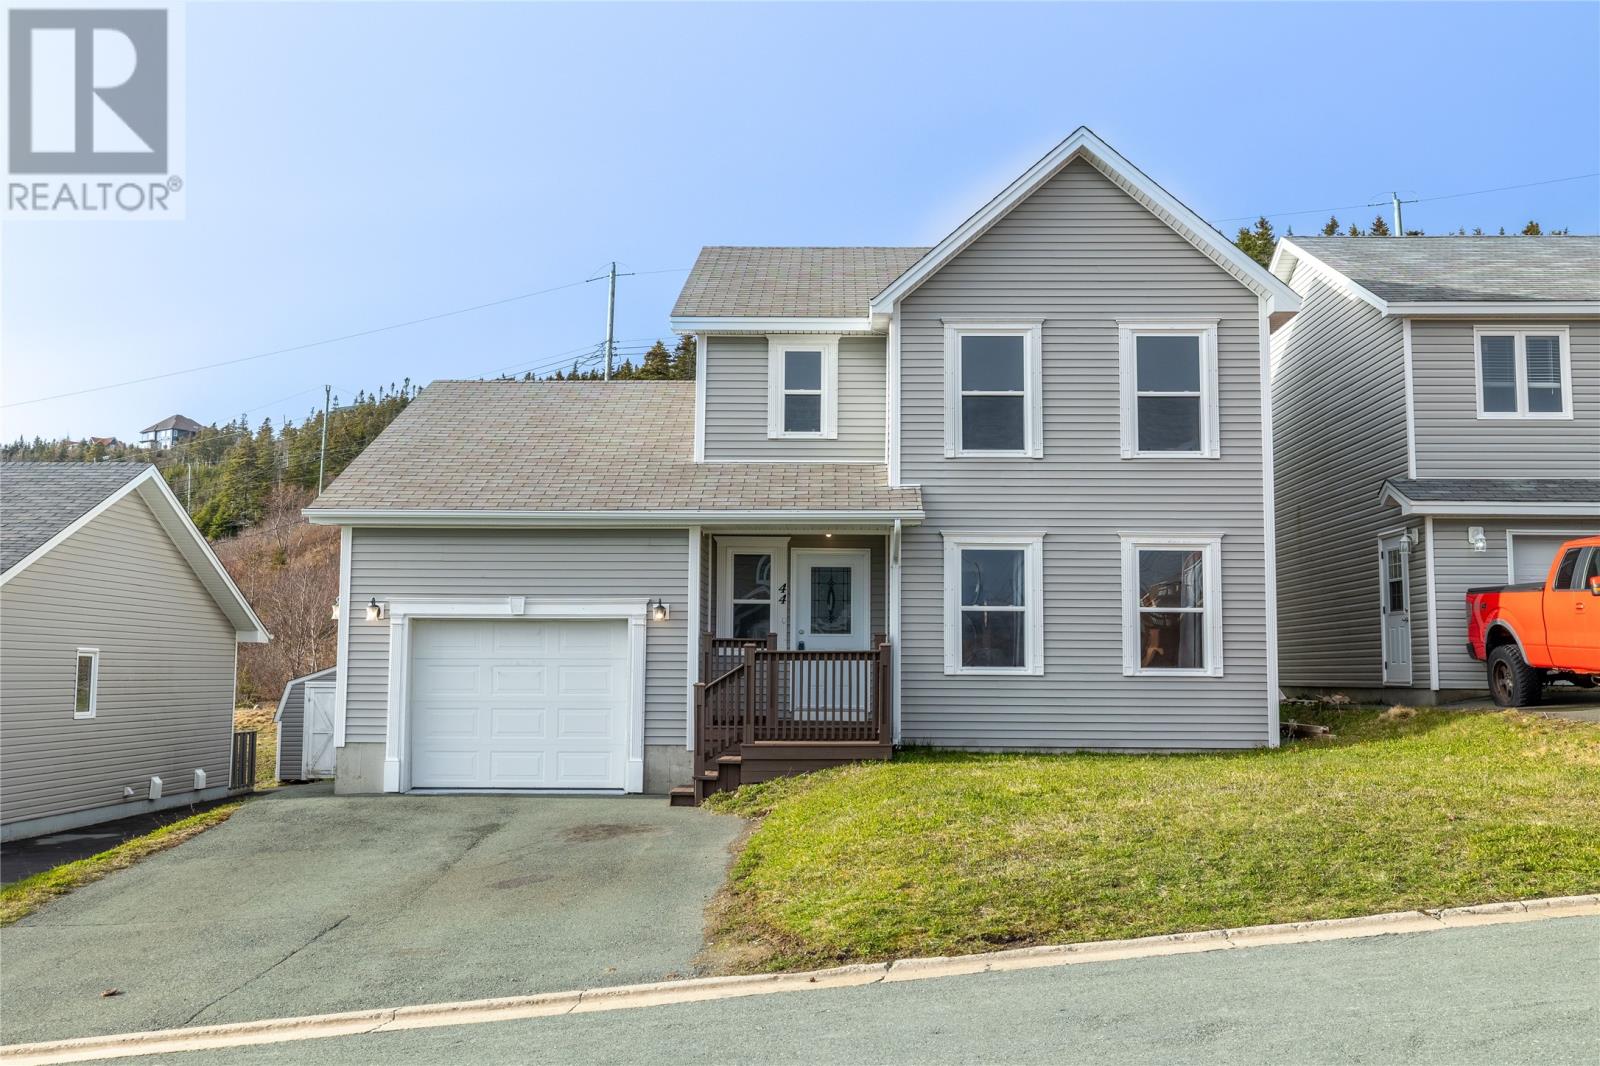 44 Brittany Drive located in Paradise, Newfoundland and Labrador